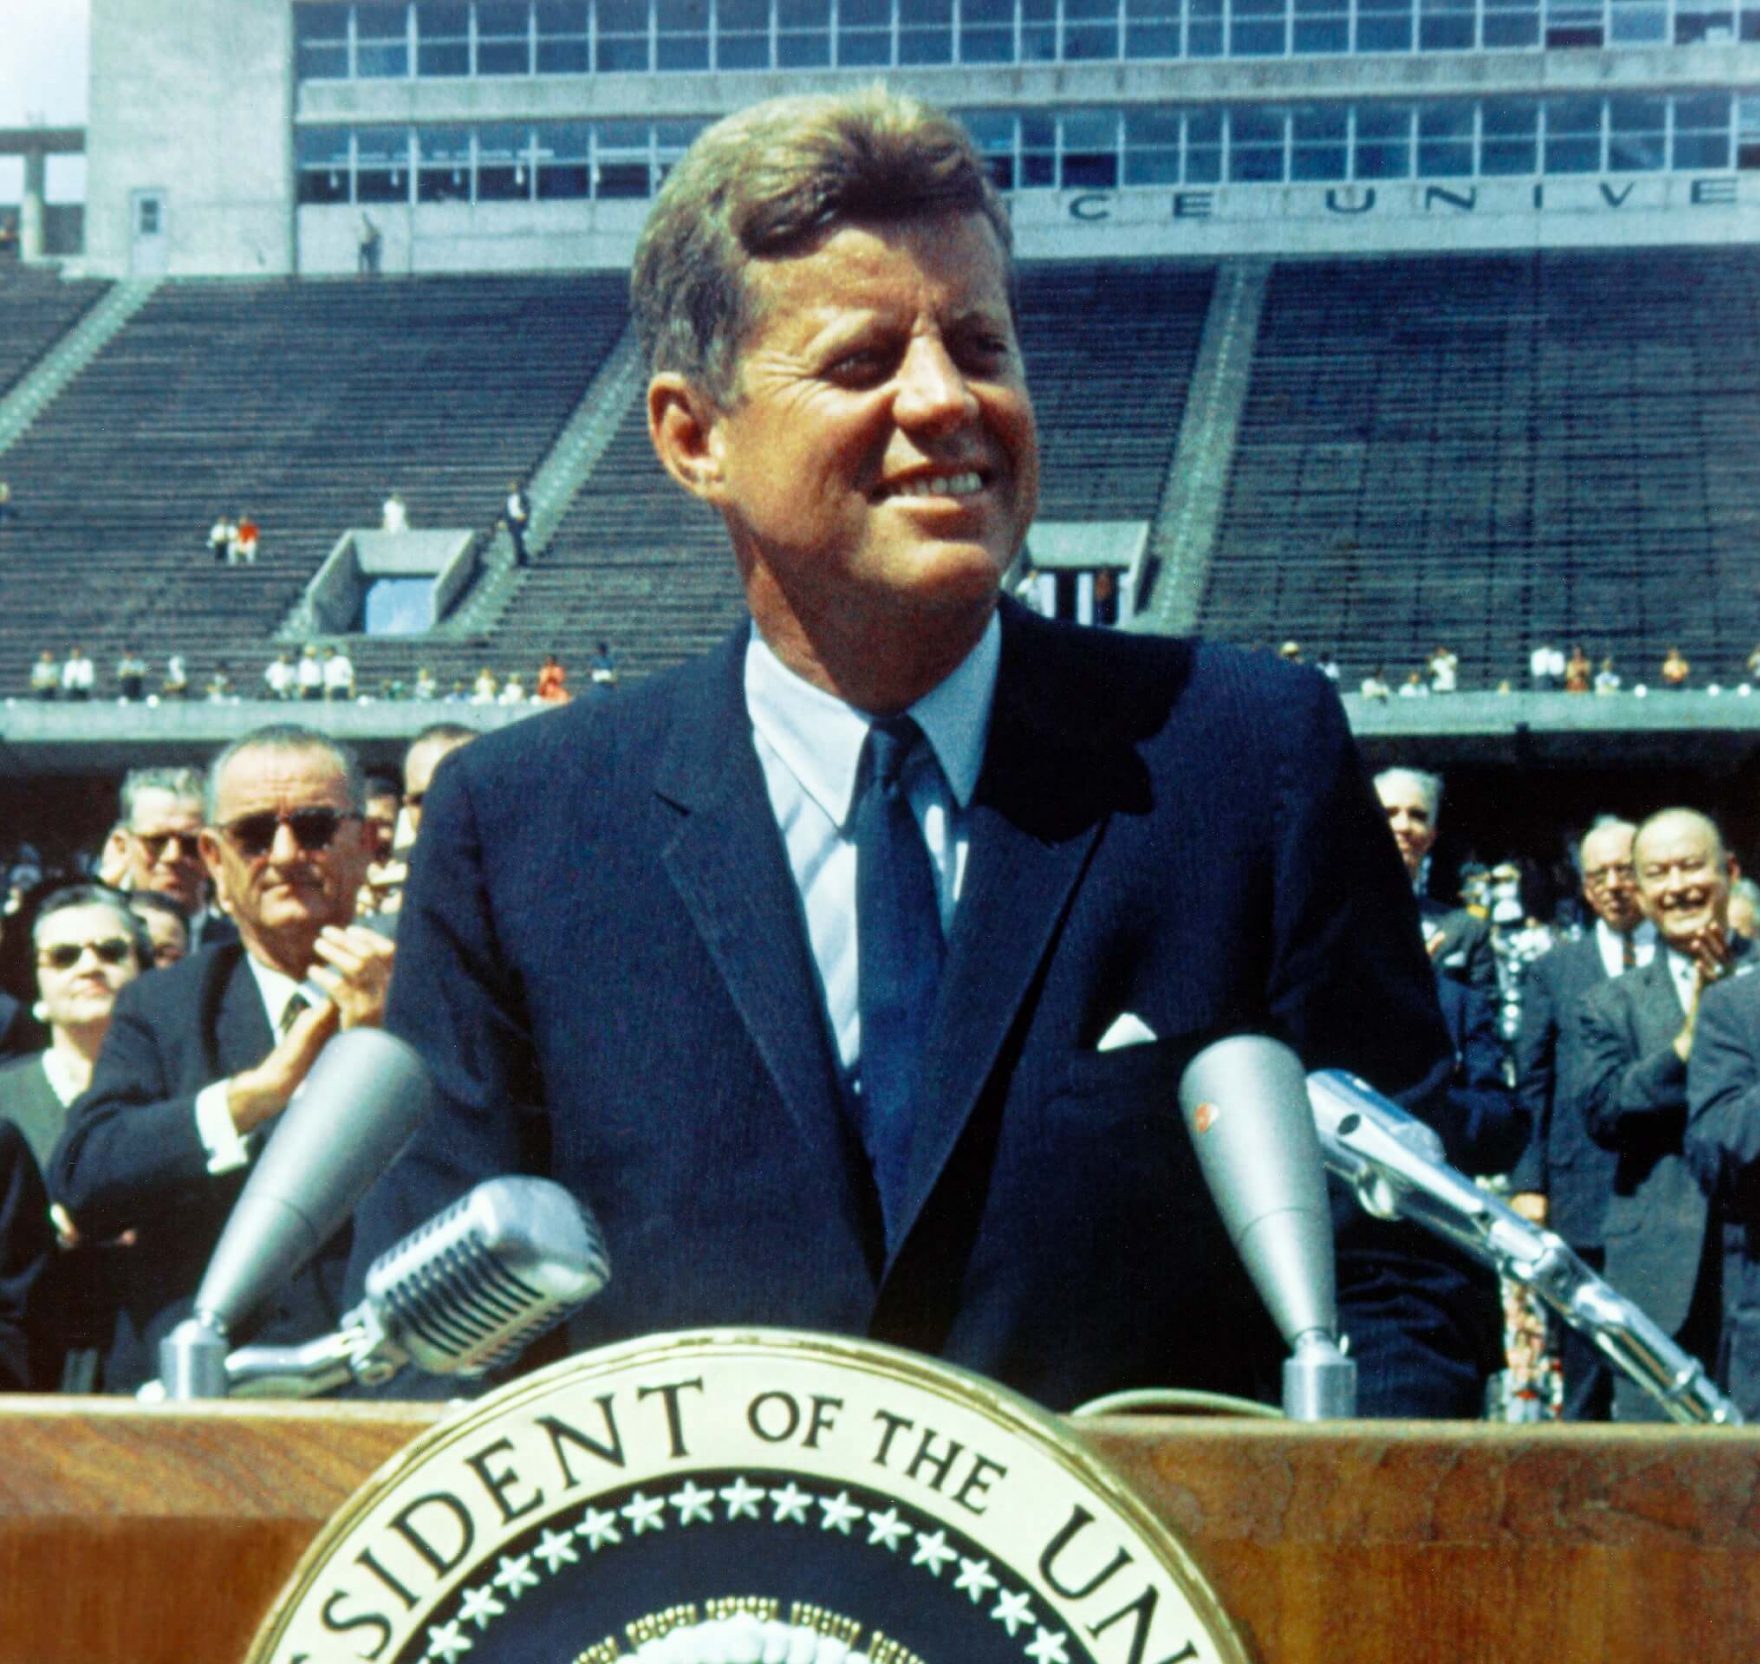 President Kennedy chooses to go to the moon while speaking at Rice University, Houston